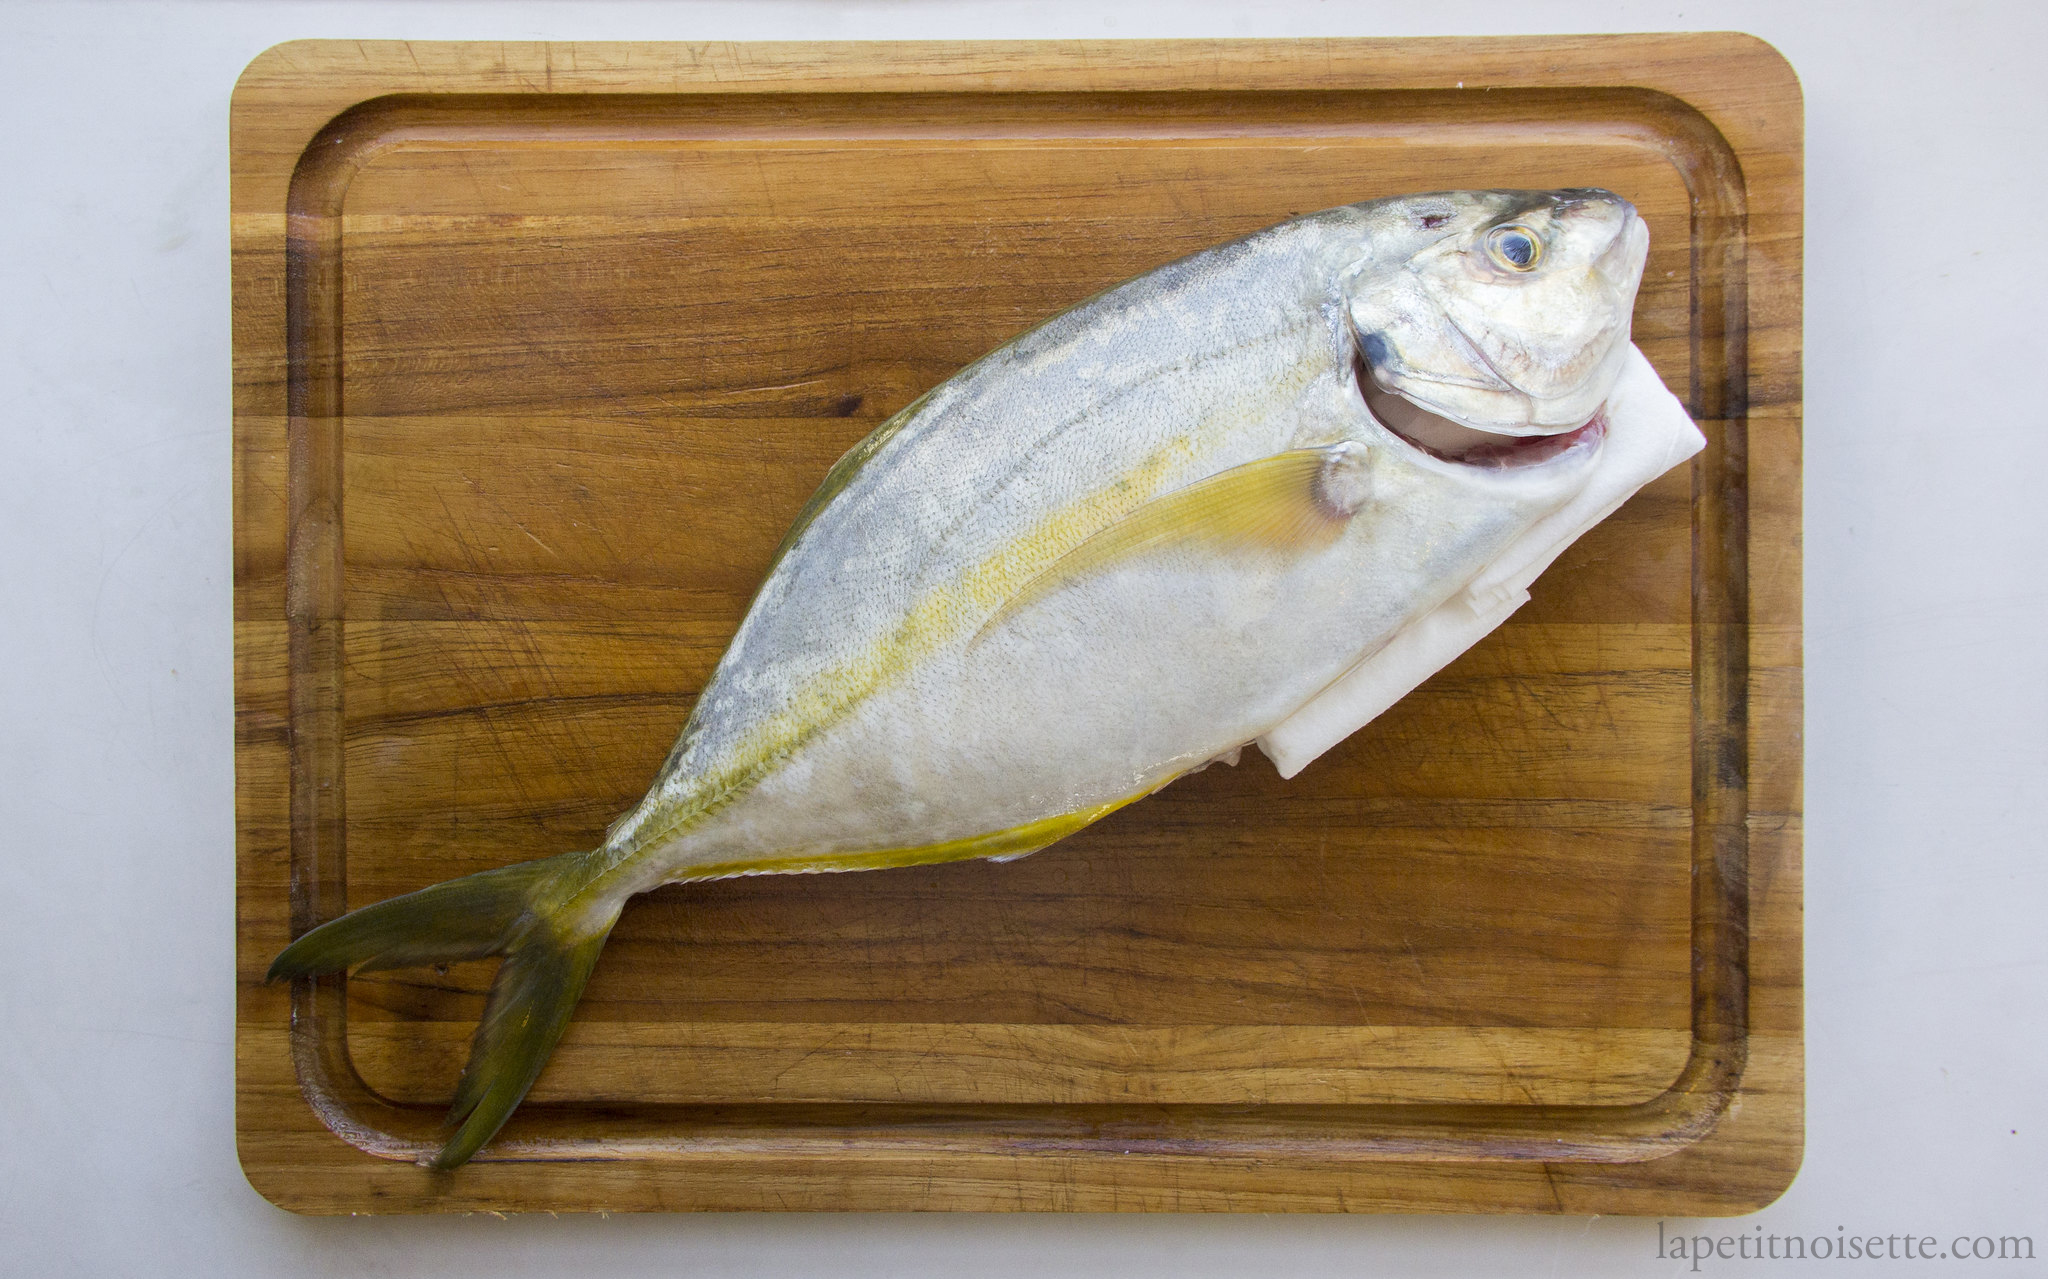 Shima Aji being prepared for ageing.